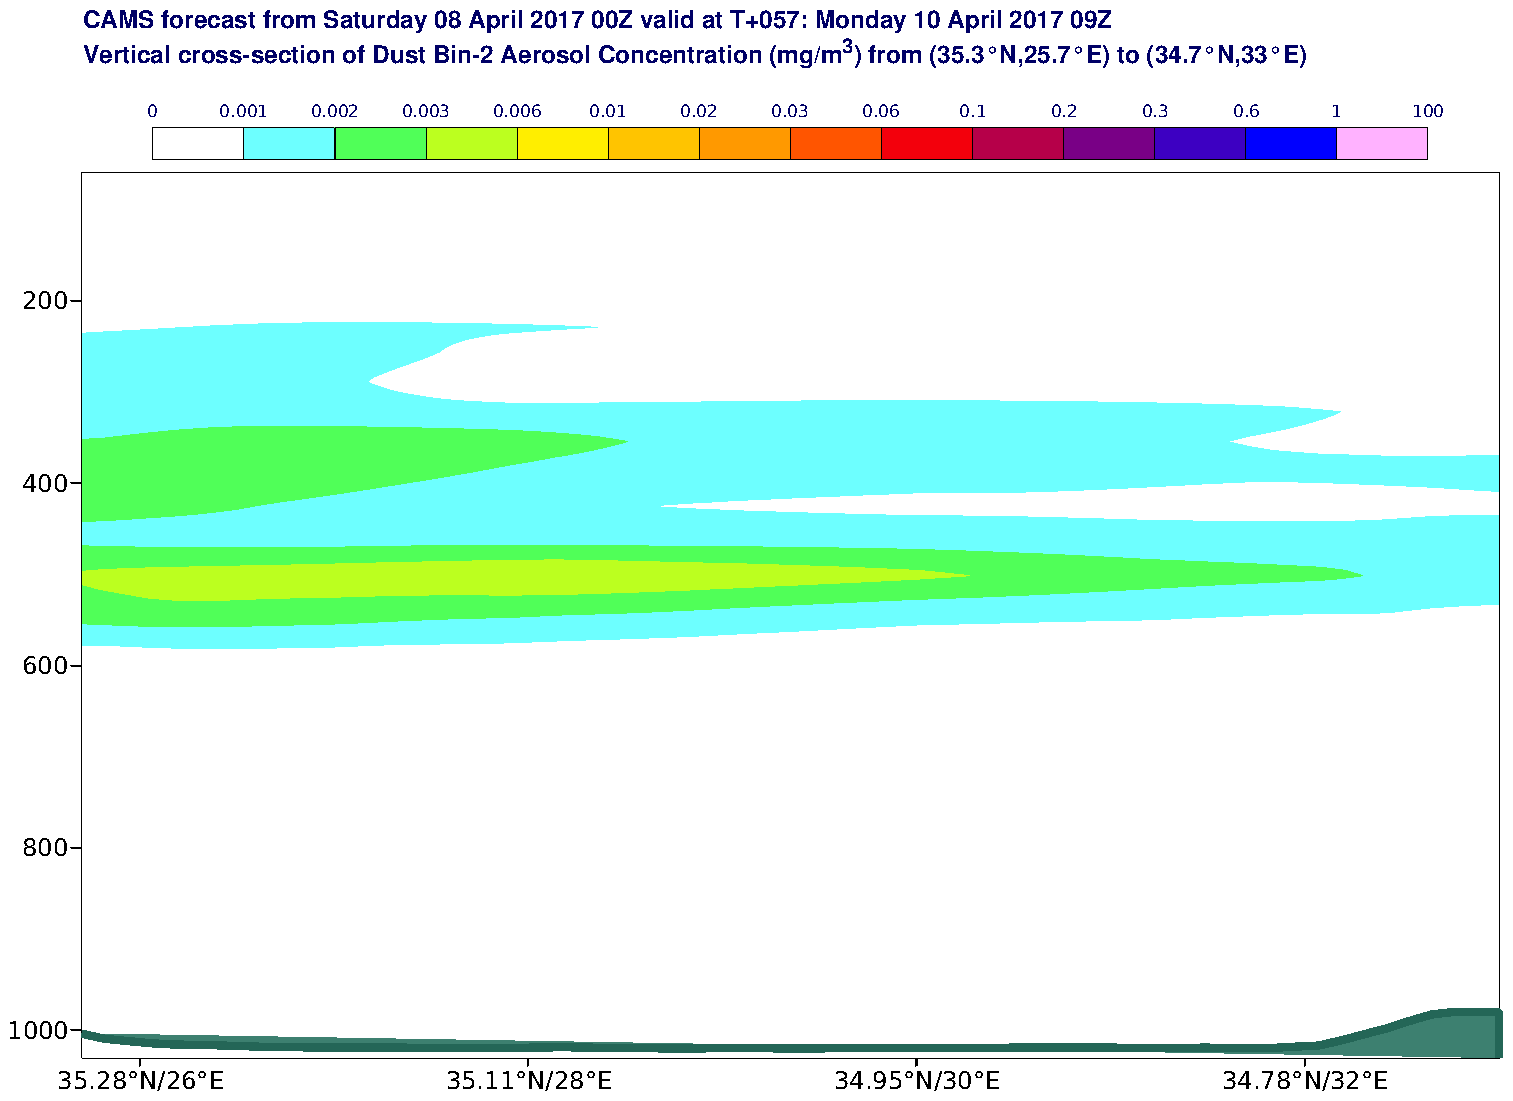 Vertical cross-section of Dust Bin-2 Aerosol Concentration (mg/m3) valid at T57 - 2017-04-10 09:00